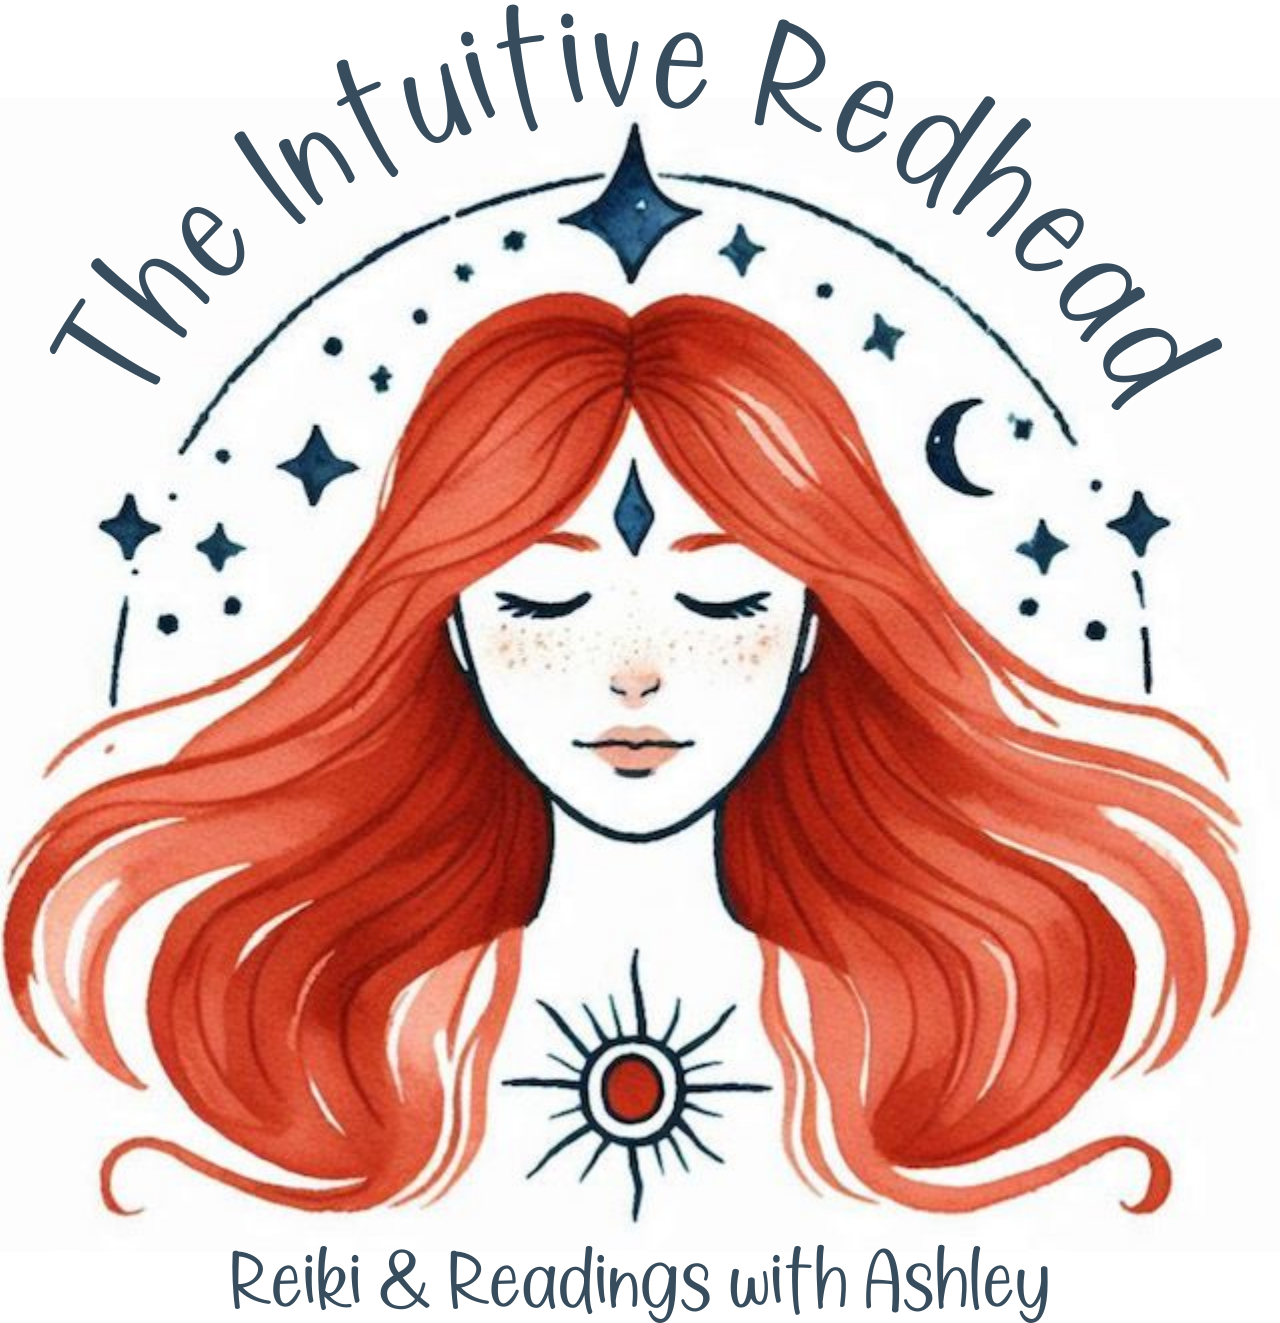 The Intuitive Redhead's logo